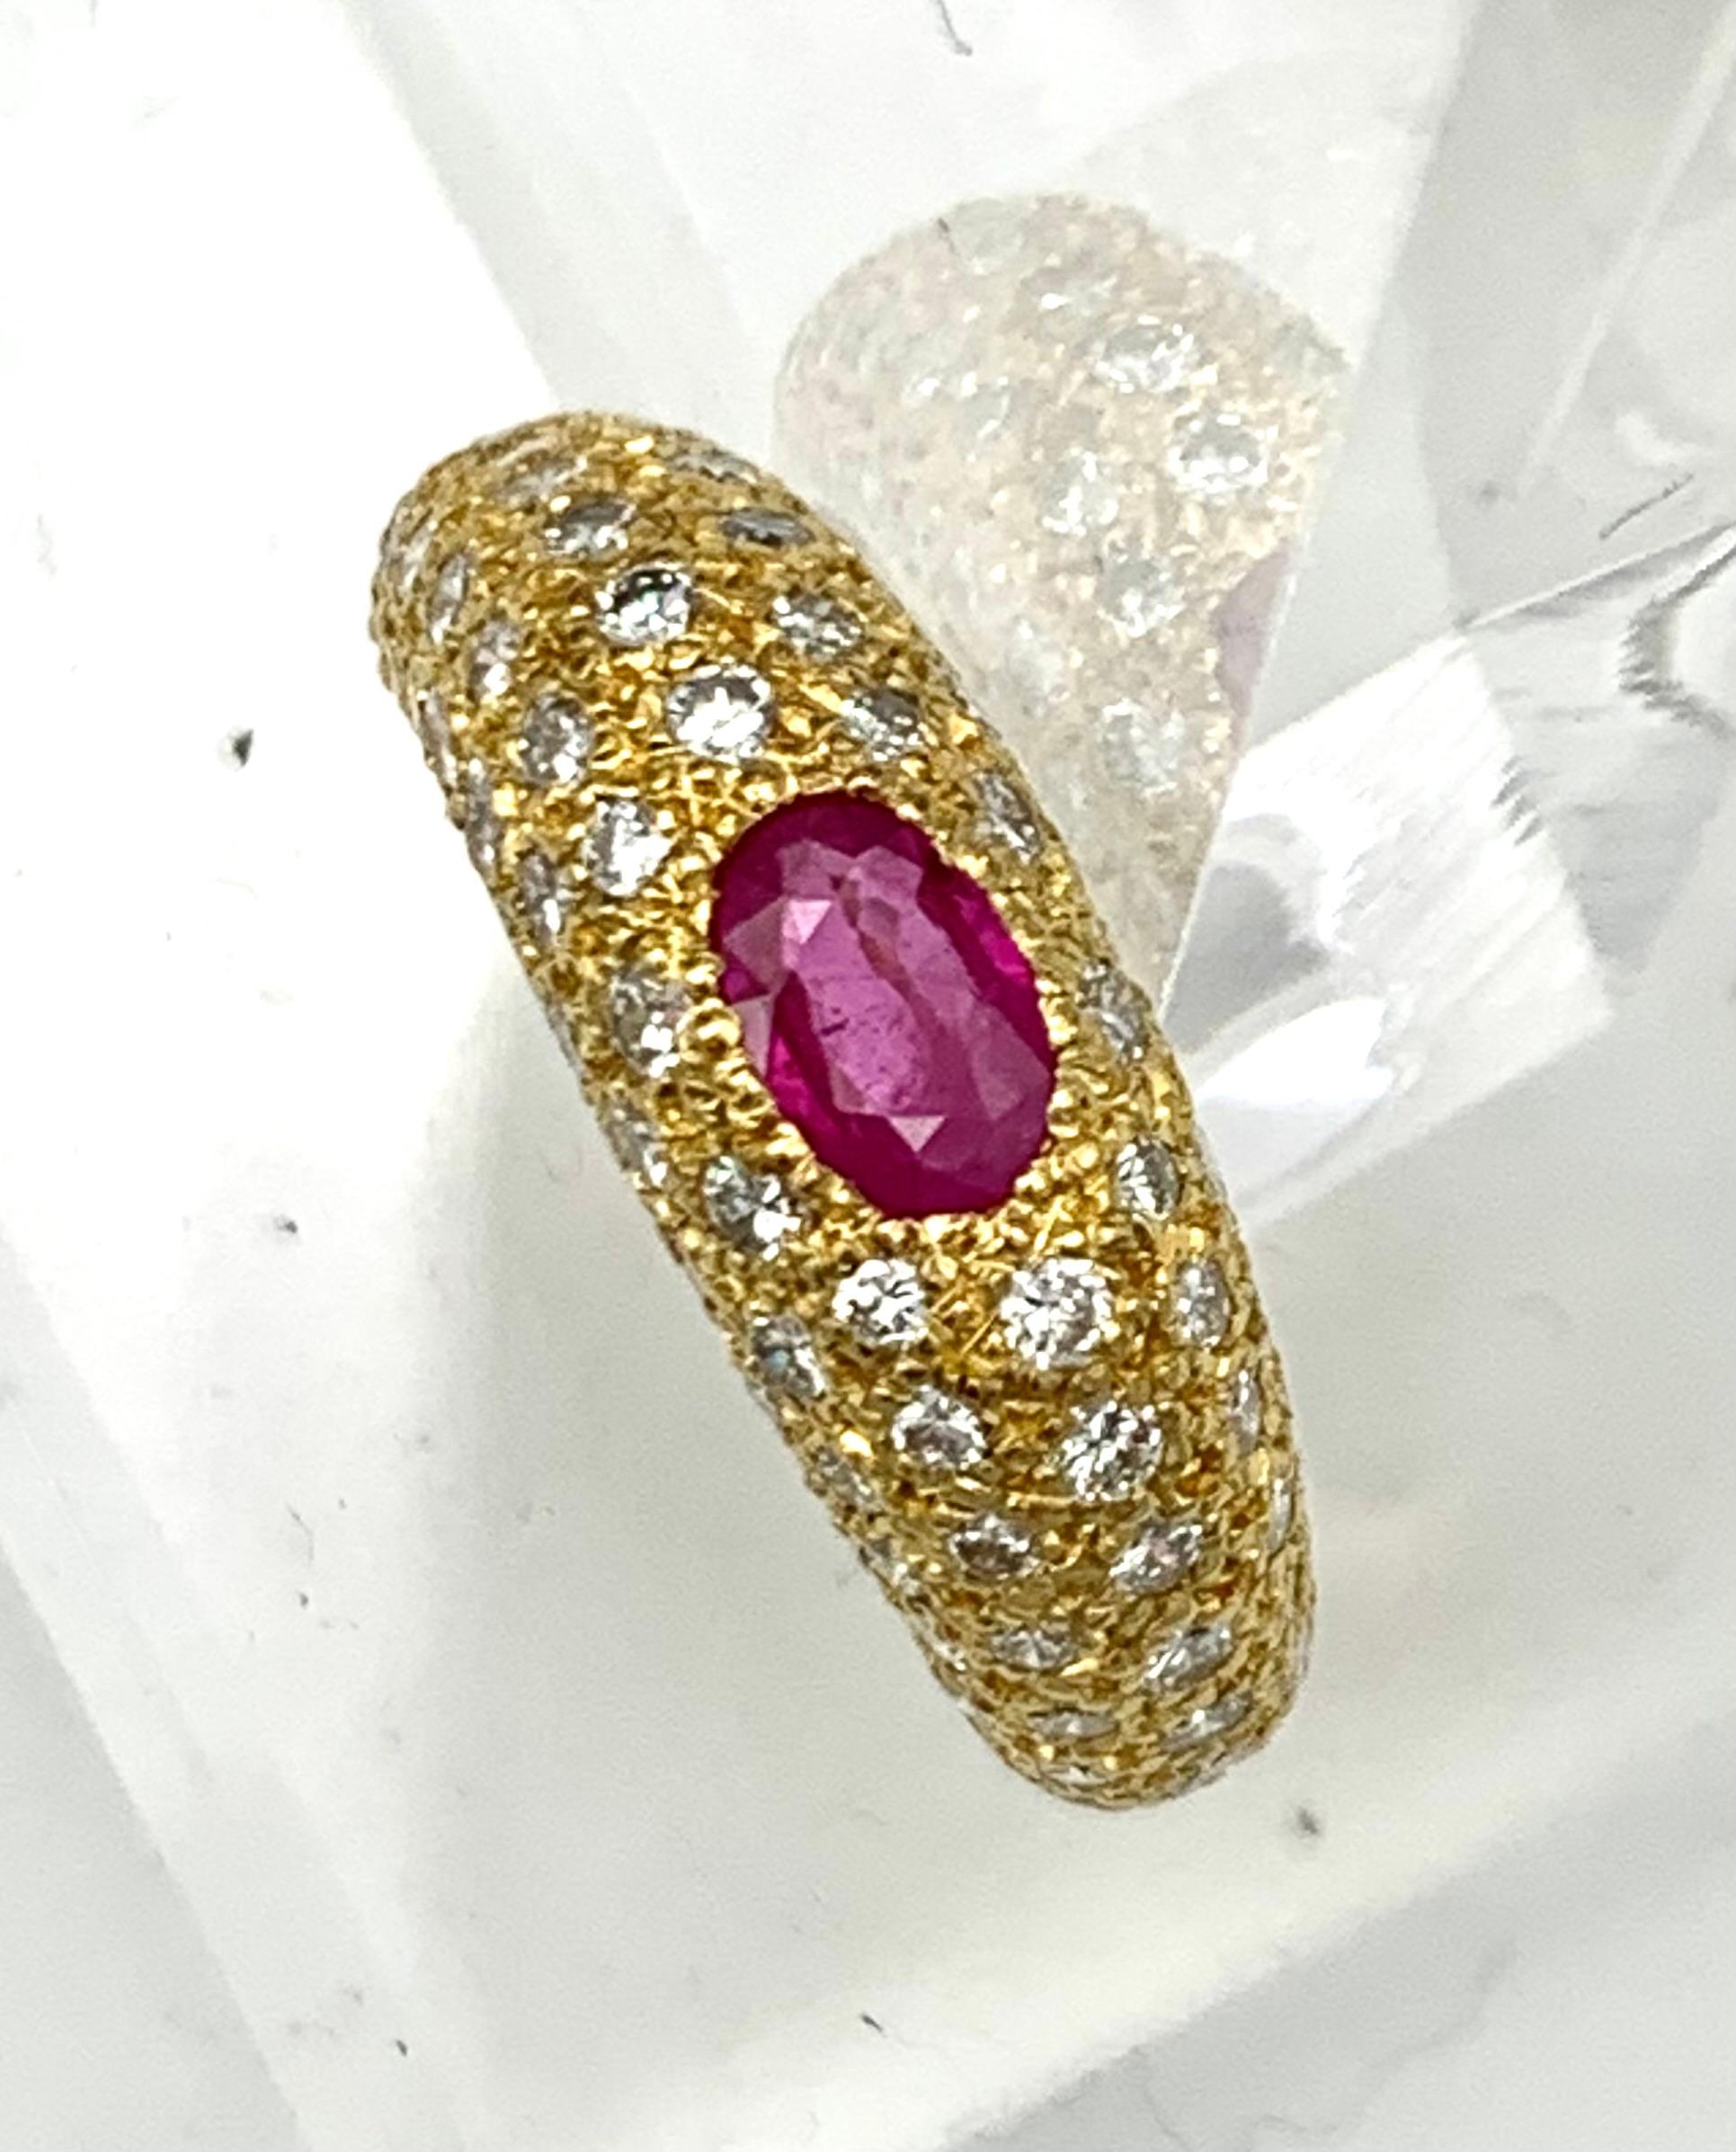 This solid domed ring was made by the London based jeweller T.O'Donoghue. It is stamped with the makers initials TO'D, the London hallmark for 18 karat and the year letter O for 1988. The ring is set with an oval ruby and 76 brilliant cut round